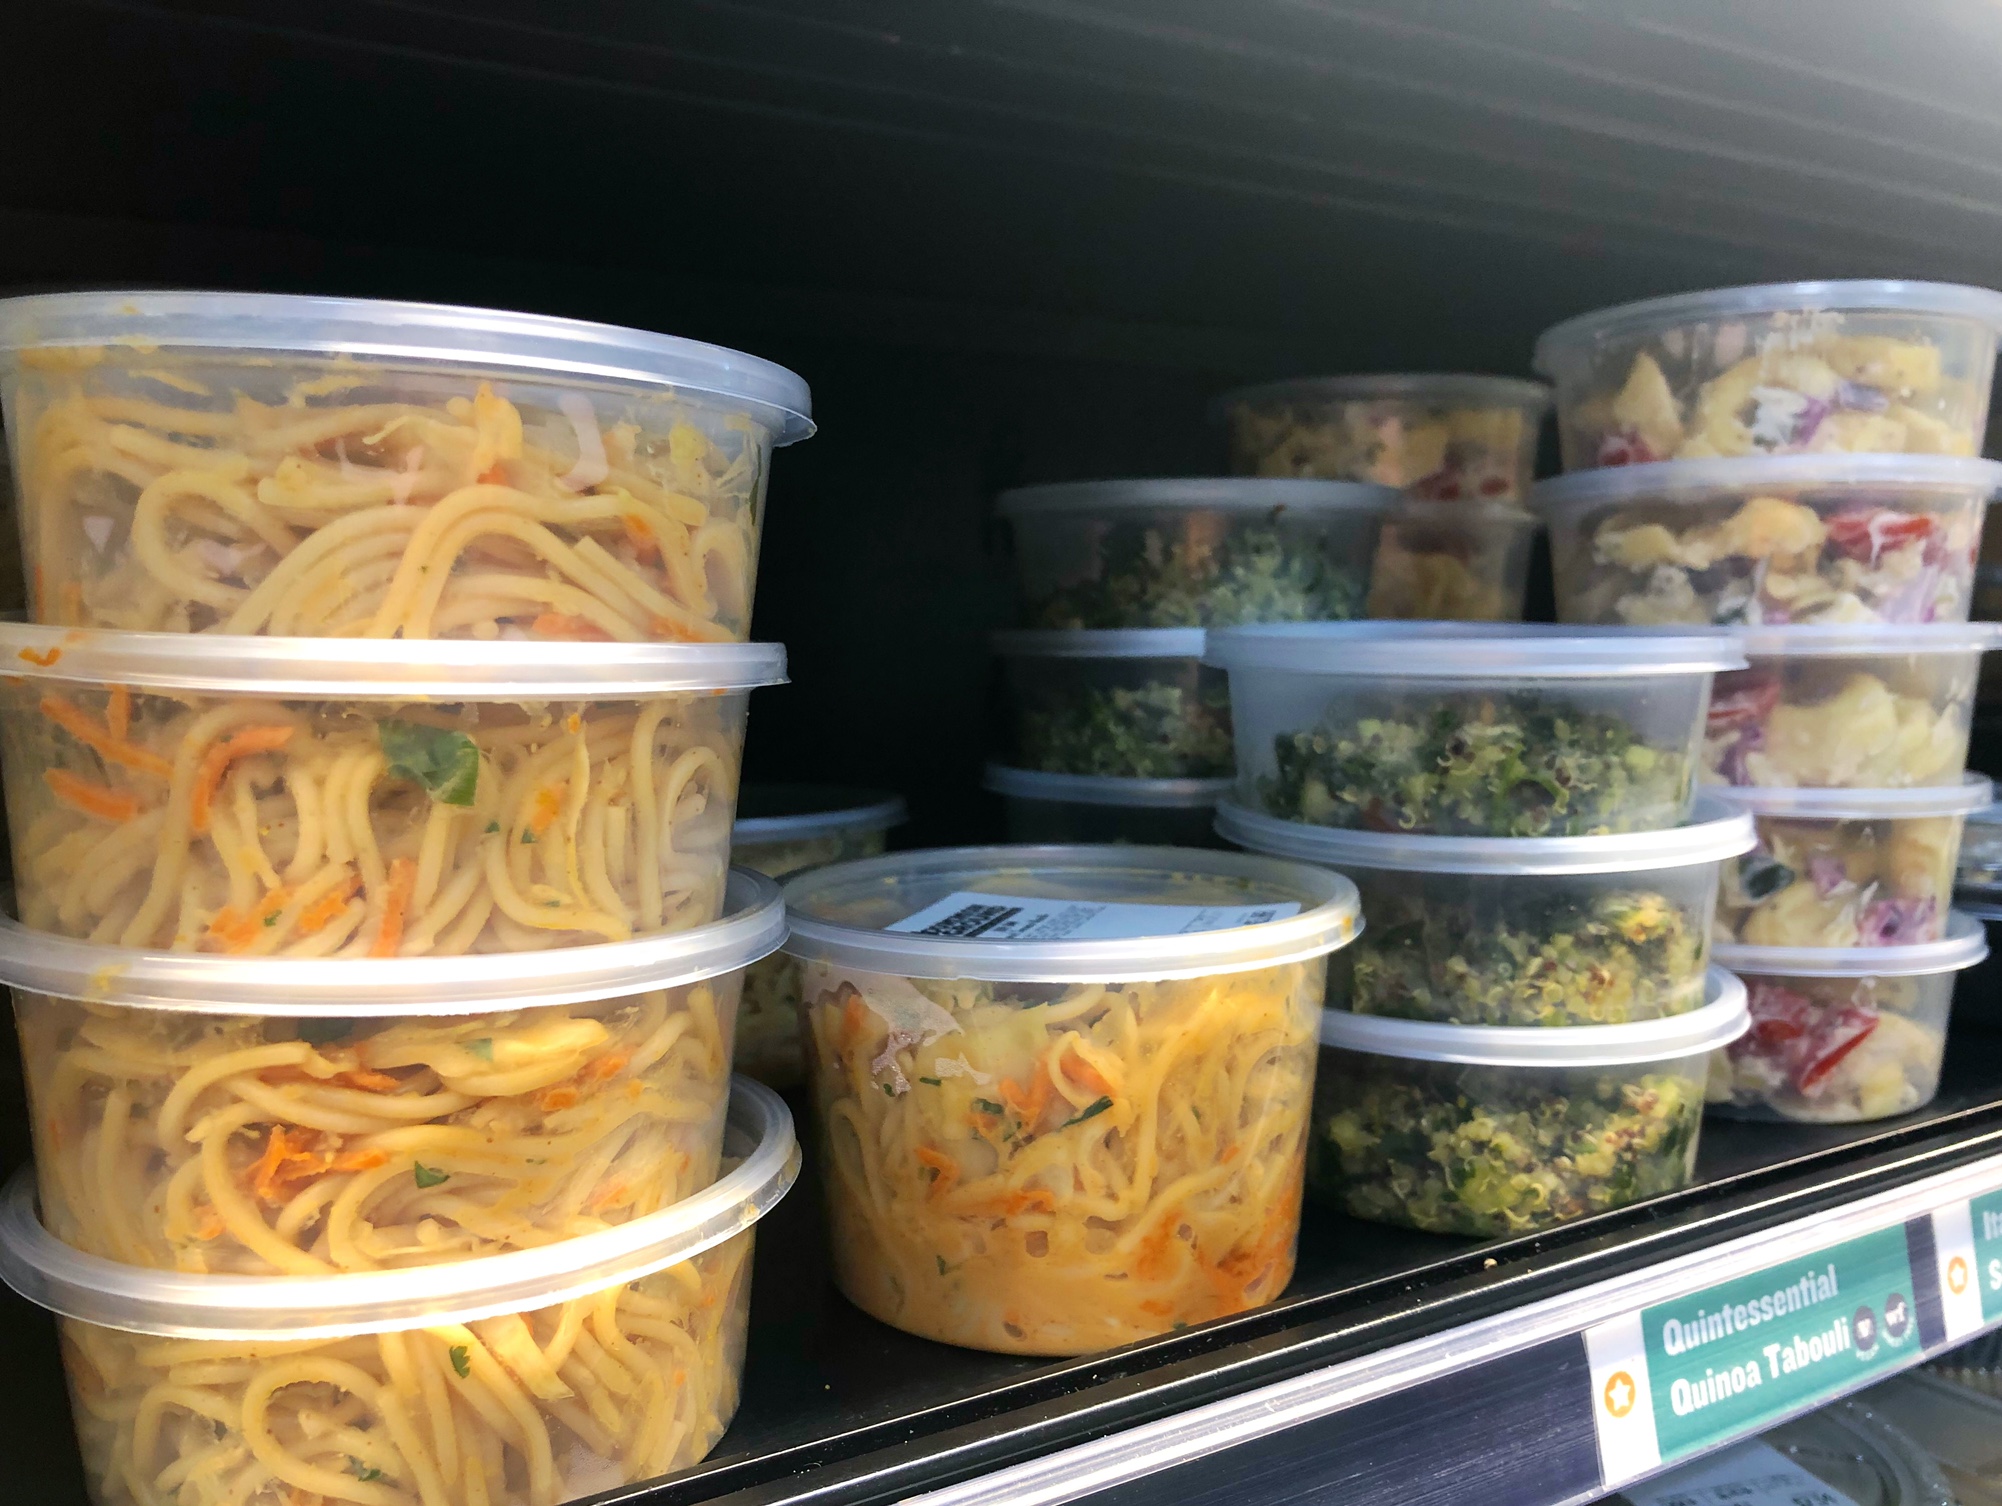 On a metal shelf, there are plastic containers of grab-and-go noodles and soups. Photo by Alyssa Buckley.